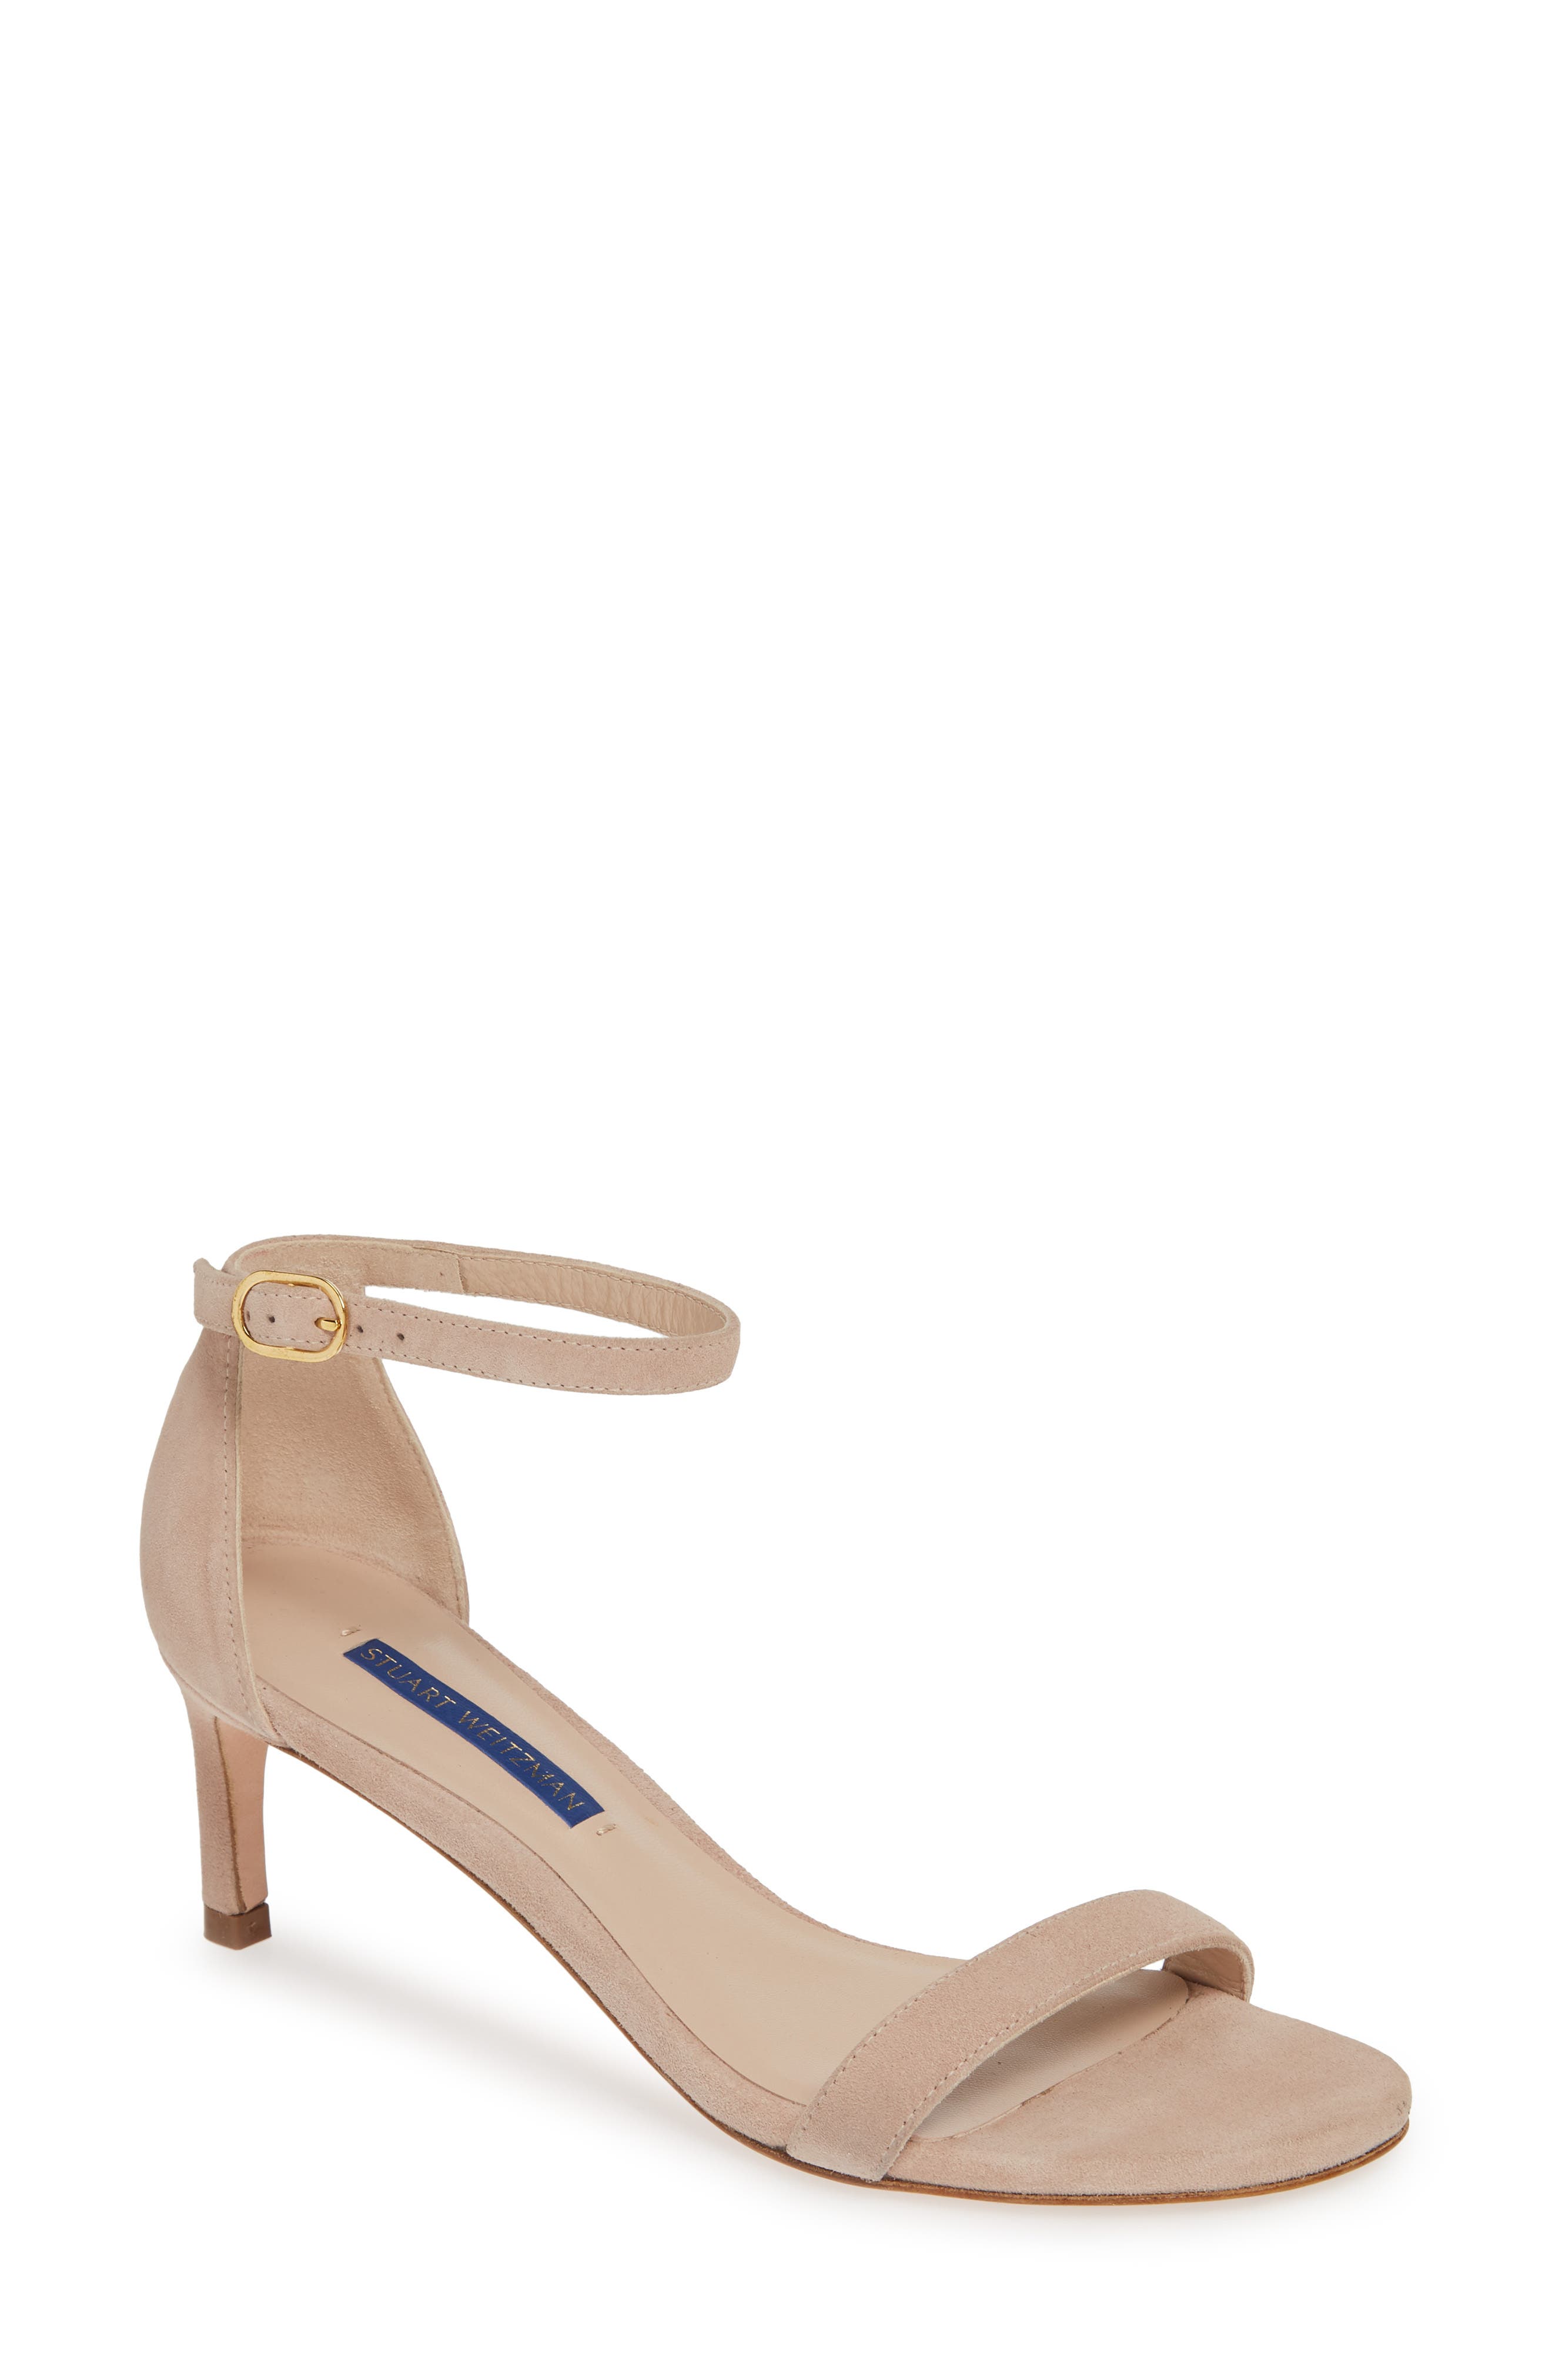 Stuart Weitzman Nunaked Lather Ankle Strap Sandal In Dolce Suede